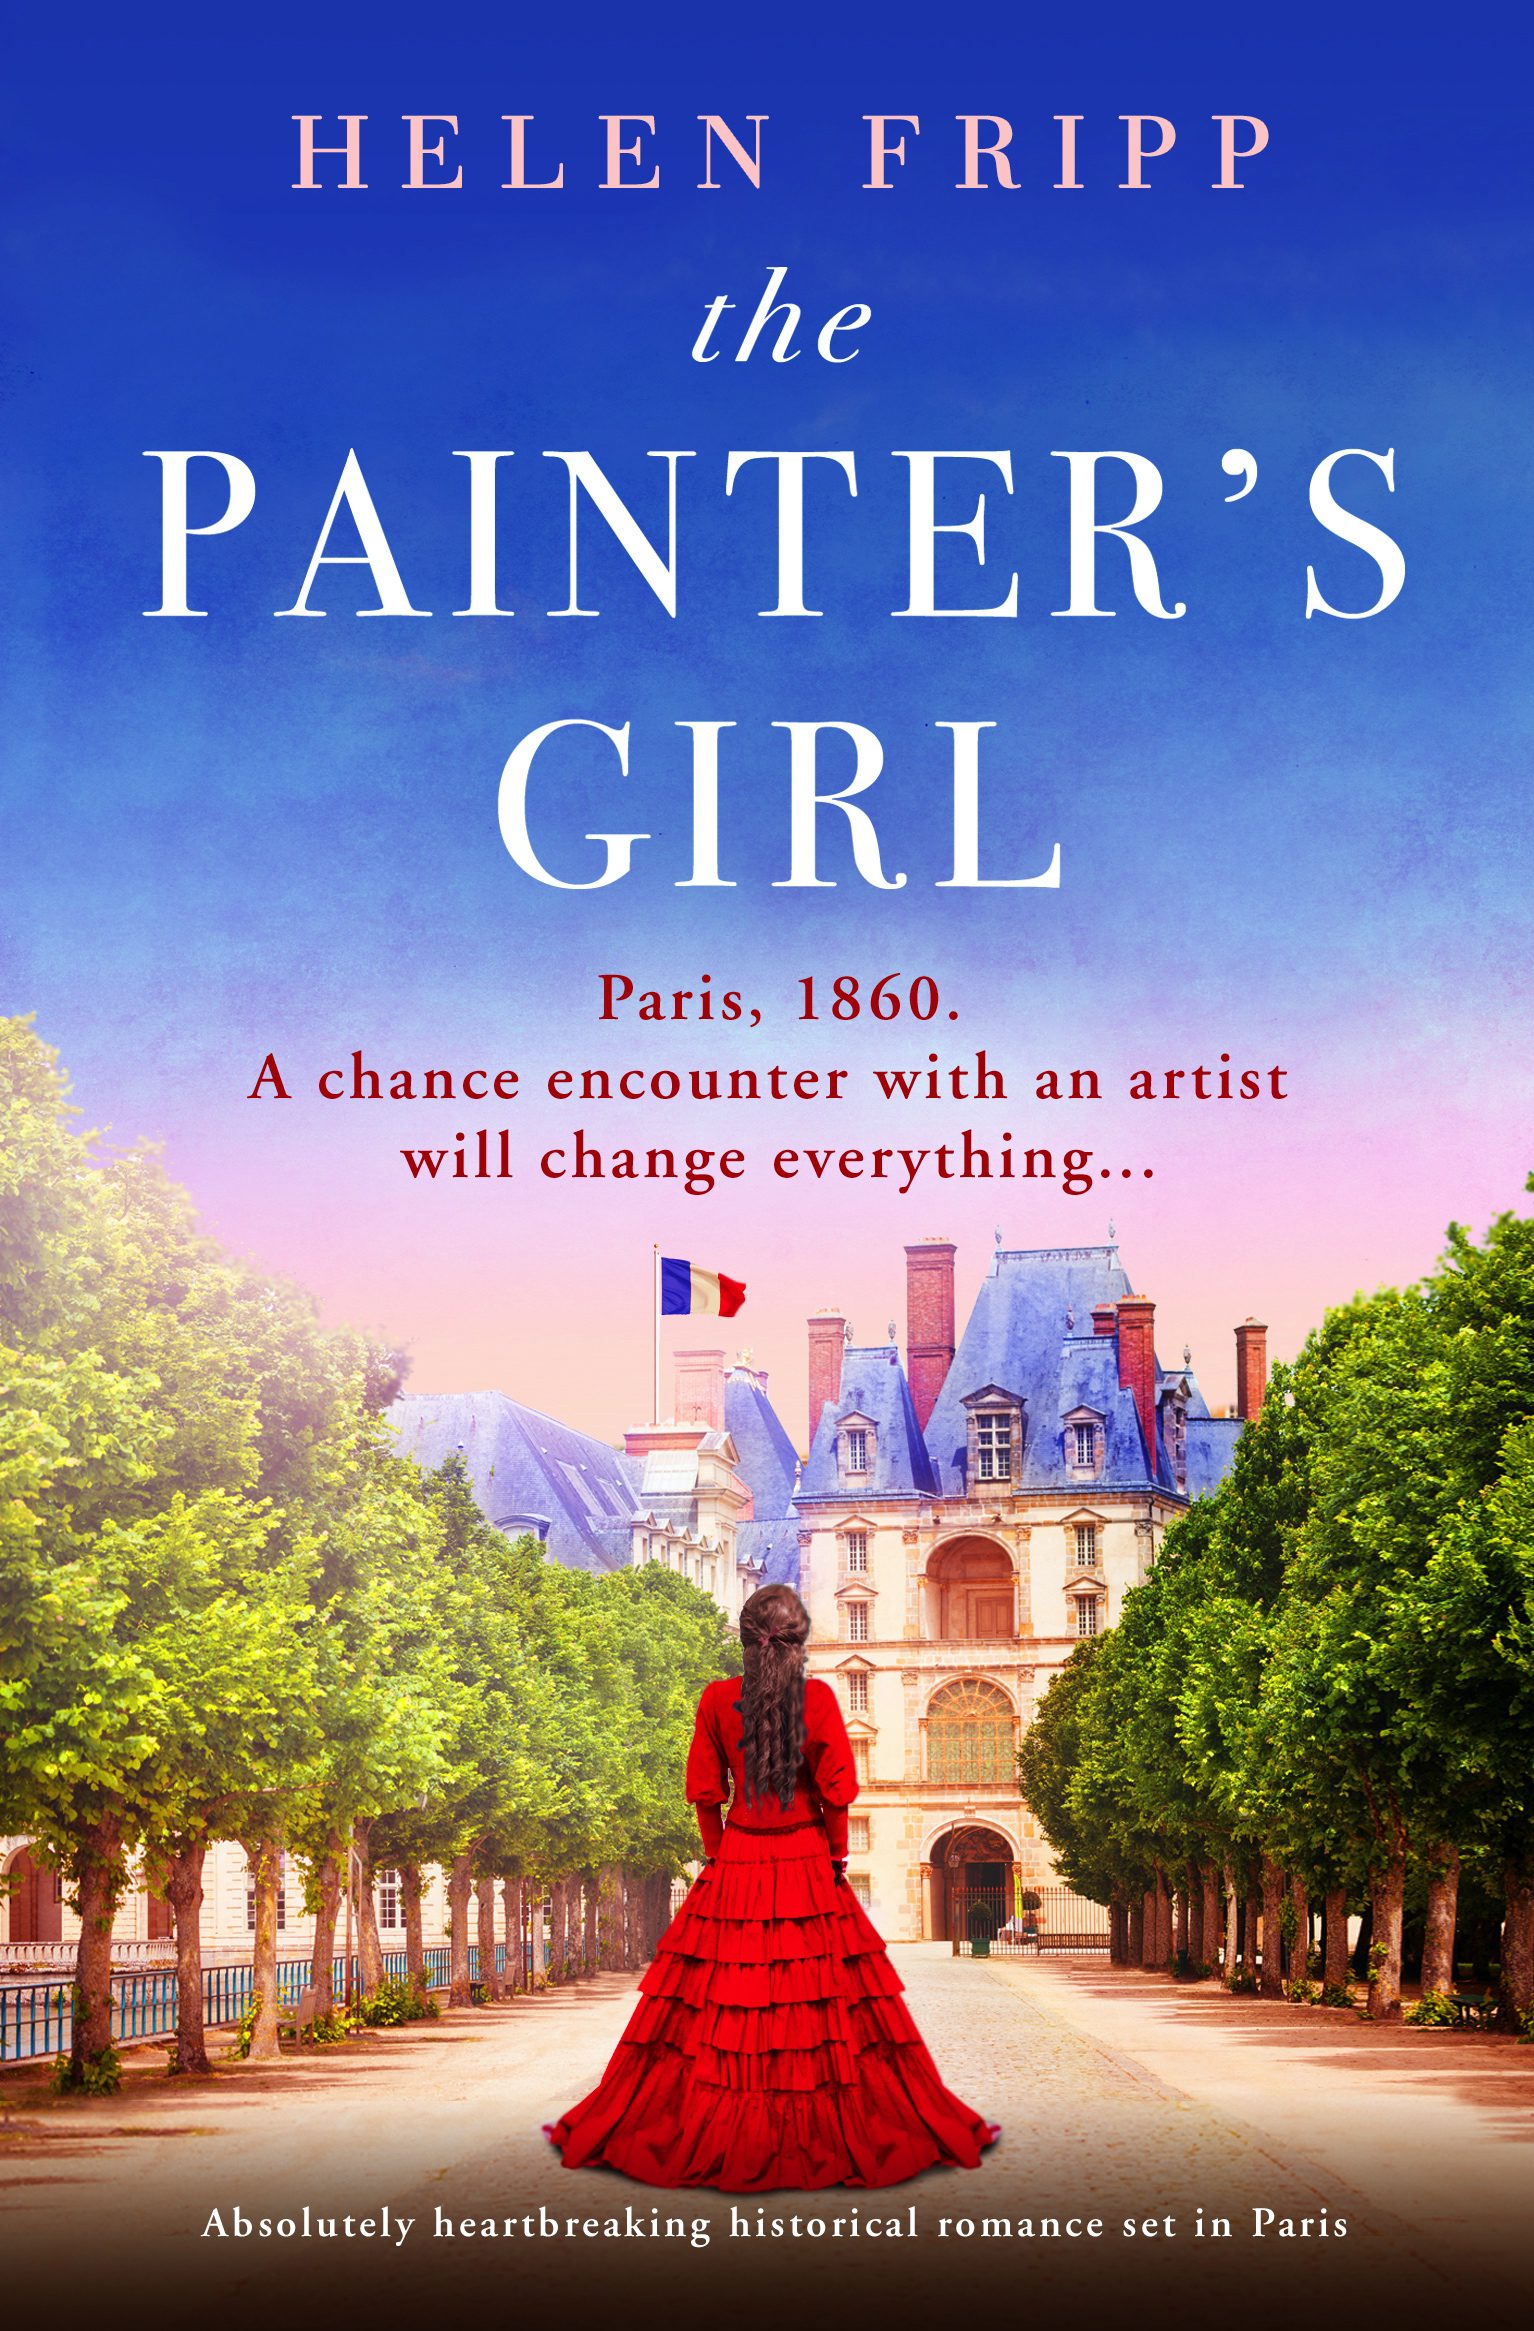 The Painter's Girl book cover